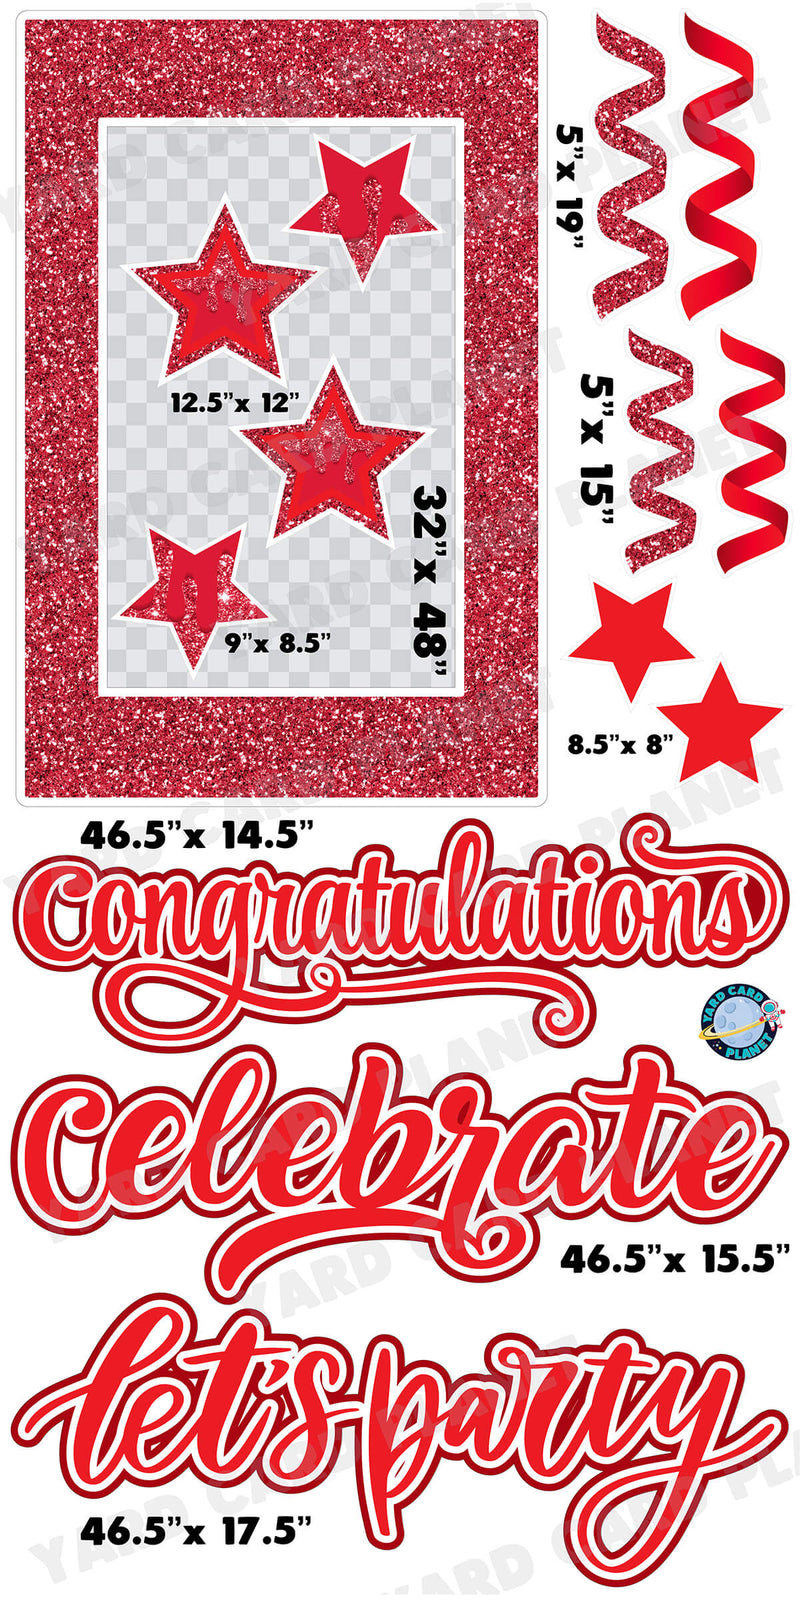 Red Glitter Multi Purpose EZ Frame with Interchangeable Greetings and Matching Yard Card Flair Set